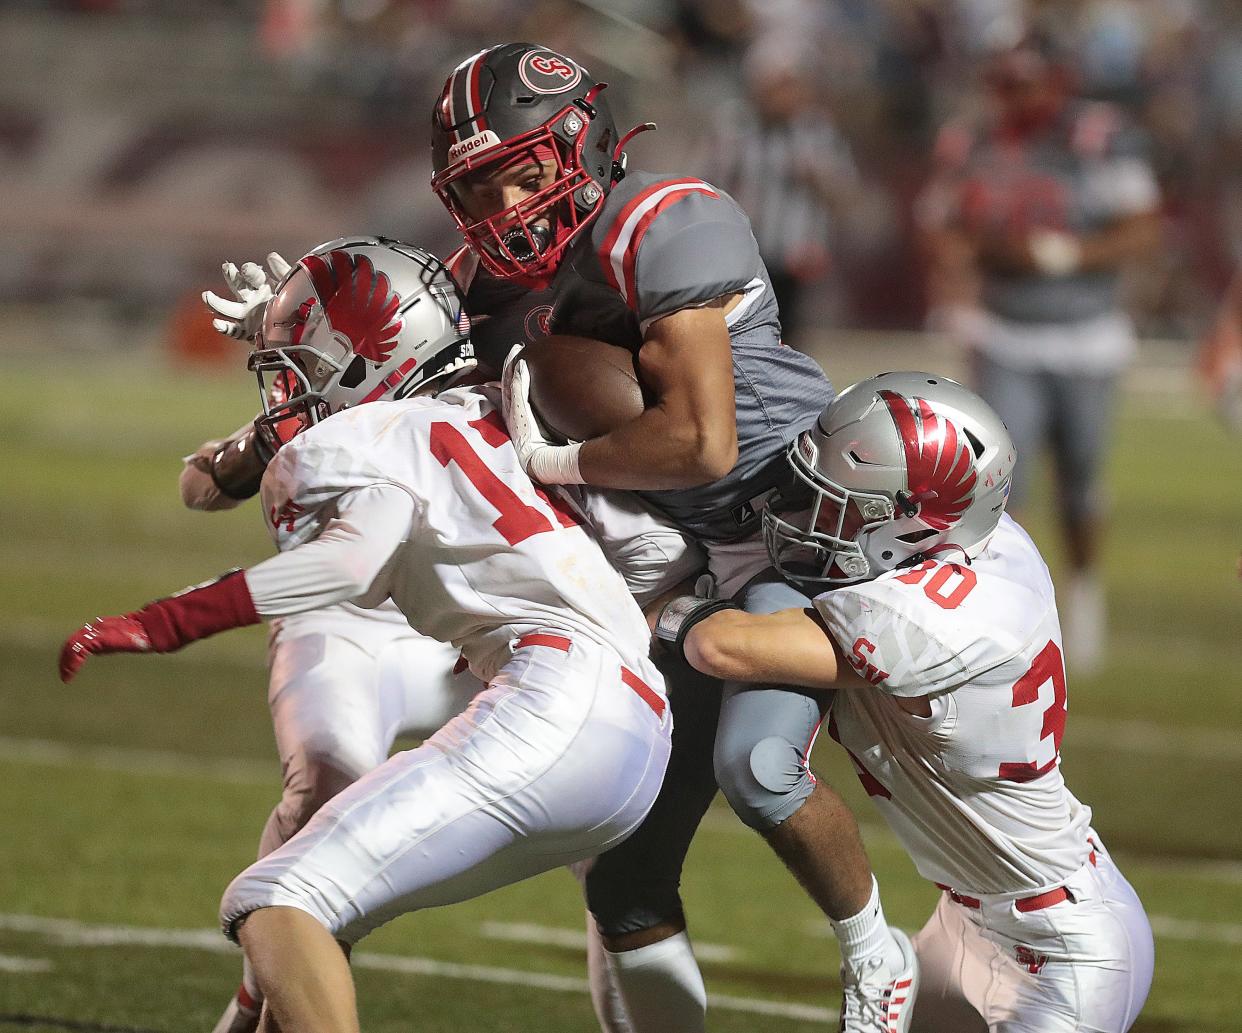 Canton South's Tavon Castle is brought down in the second half by Sandy Valley's Troy Snyder, 11, Lukas Gilland ,17, and Jack Murphy, 30, at Canton South, Friday, September 2, 2022.